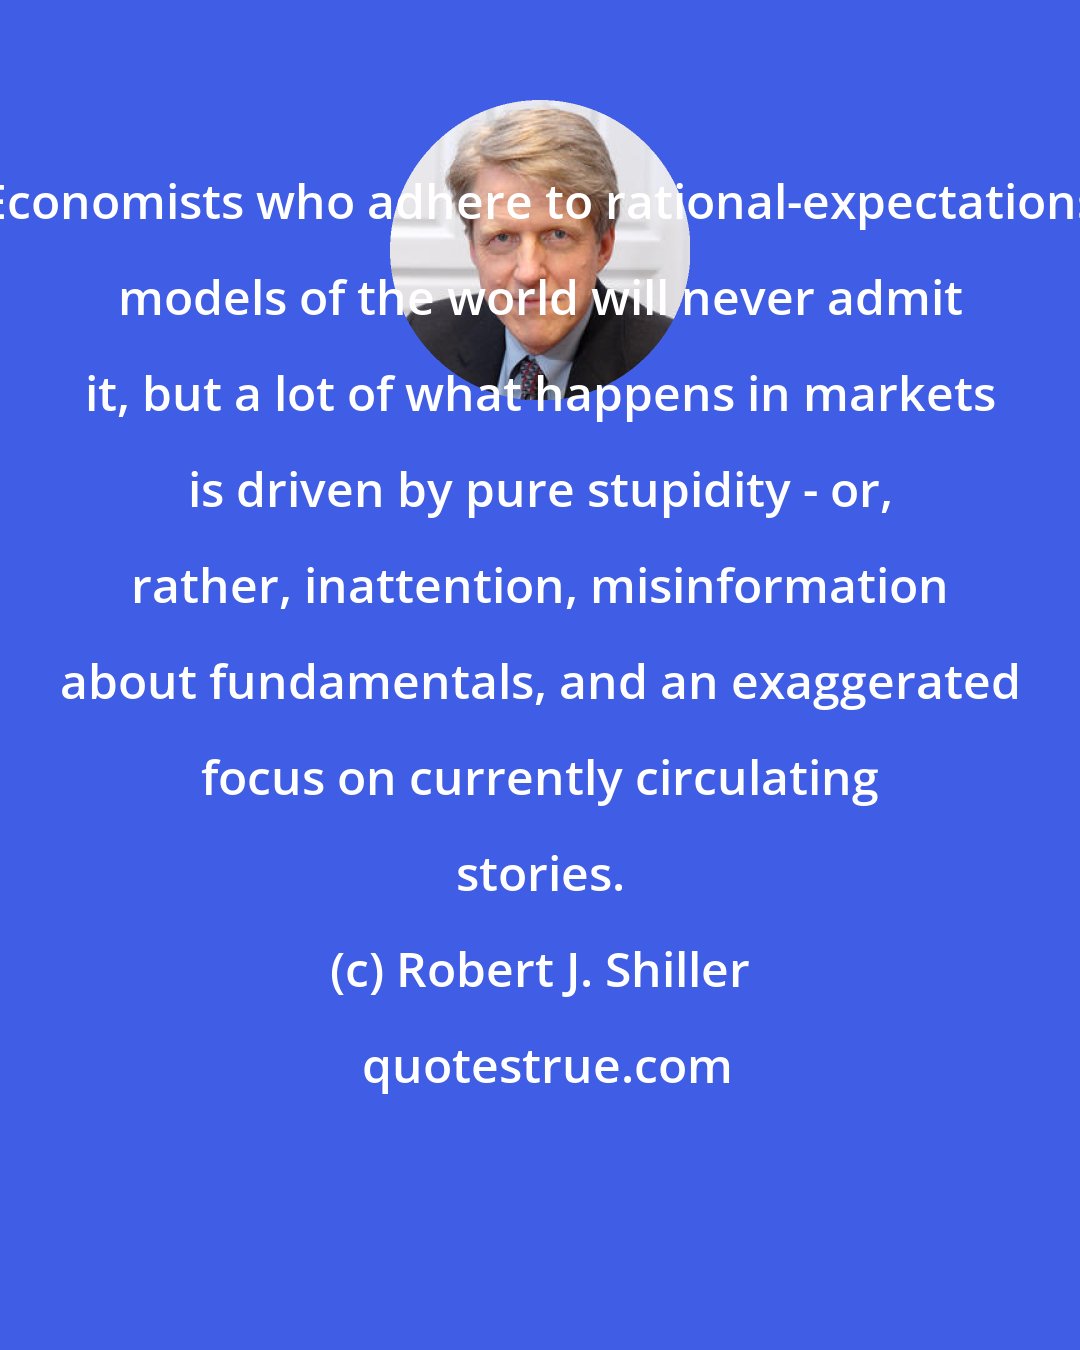 Robert J. Shiller: Economists who adhere to rational-expectations models of the world will never admit it, but a lot of what happens in markets is driven by pure stupidity - or, rather, inattention, misinformation about fundamentals, and an exaggerated focus on currently circulating stories.